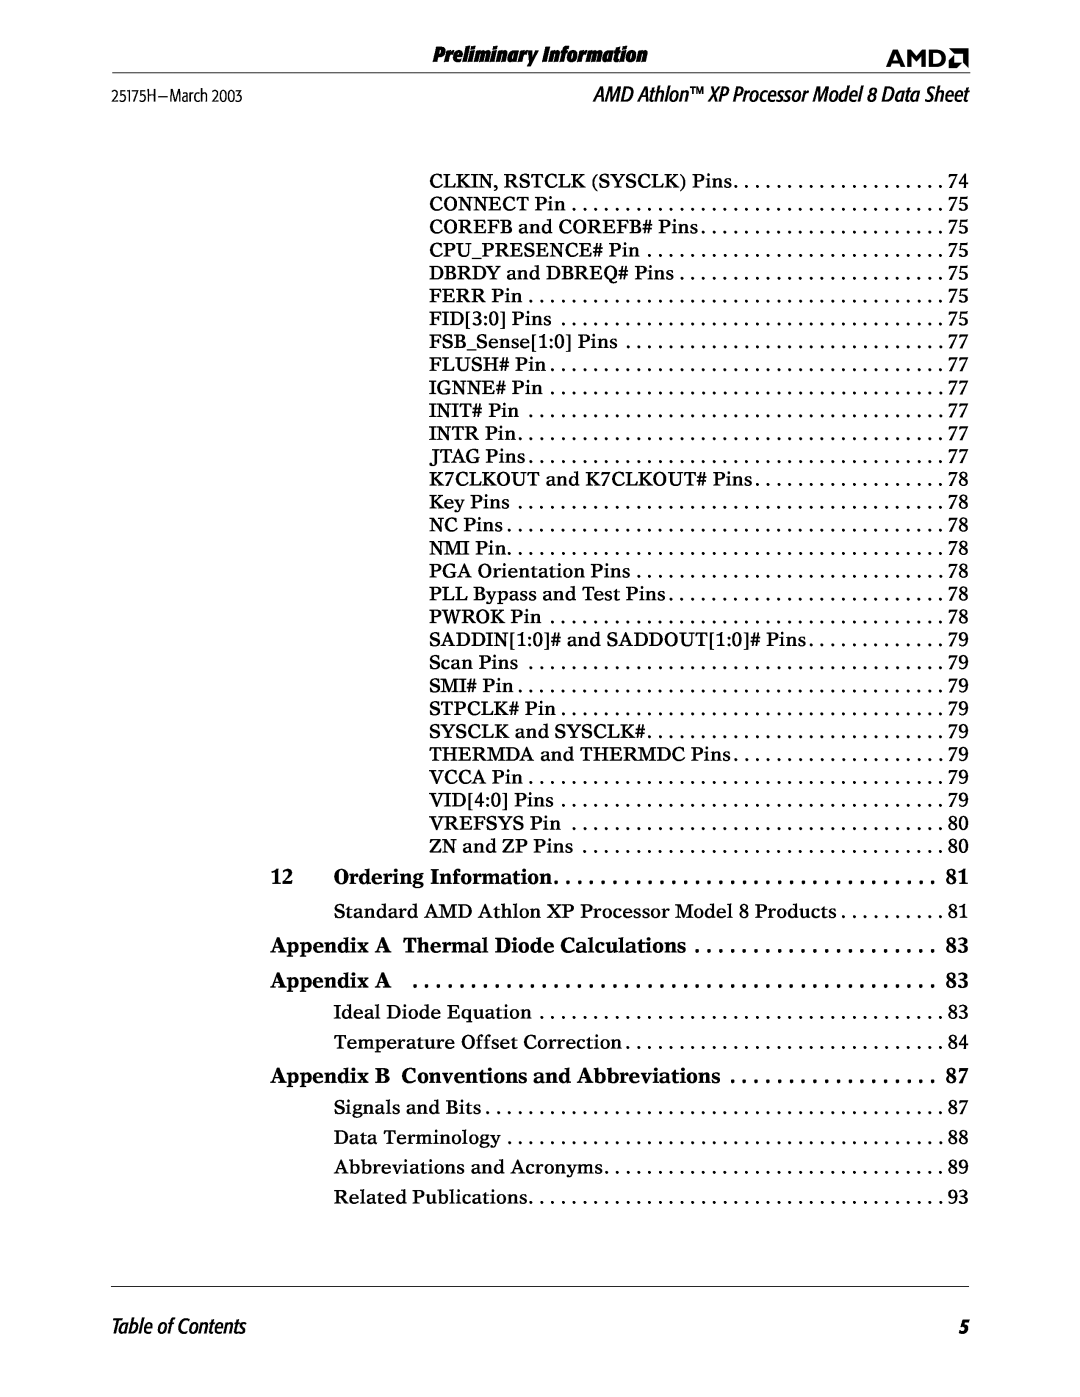 AMD 8 manual Ordering Information, Appendix B Conventions and Abbreviations, Preliminary Information, Table of Contents 